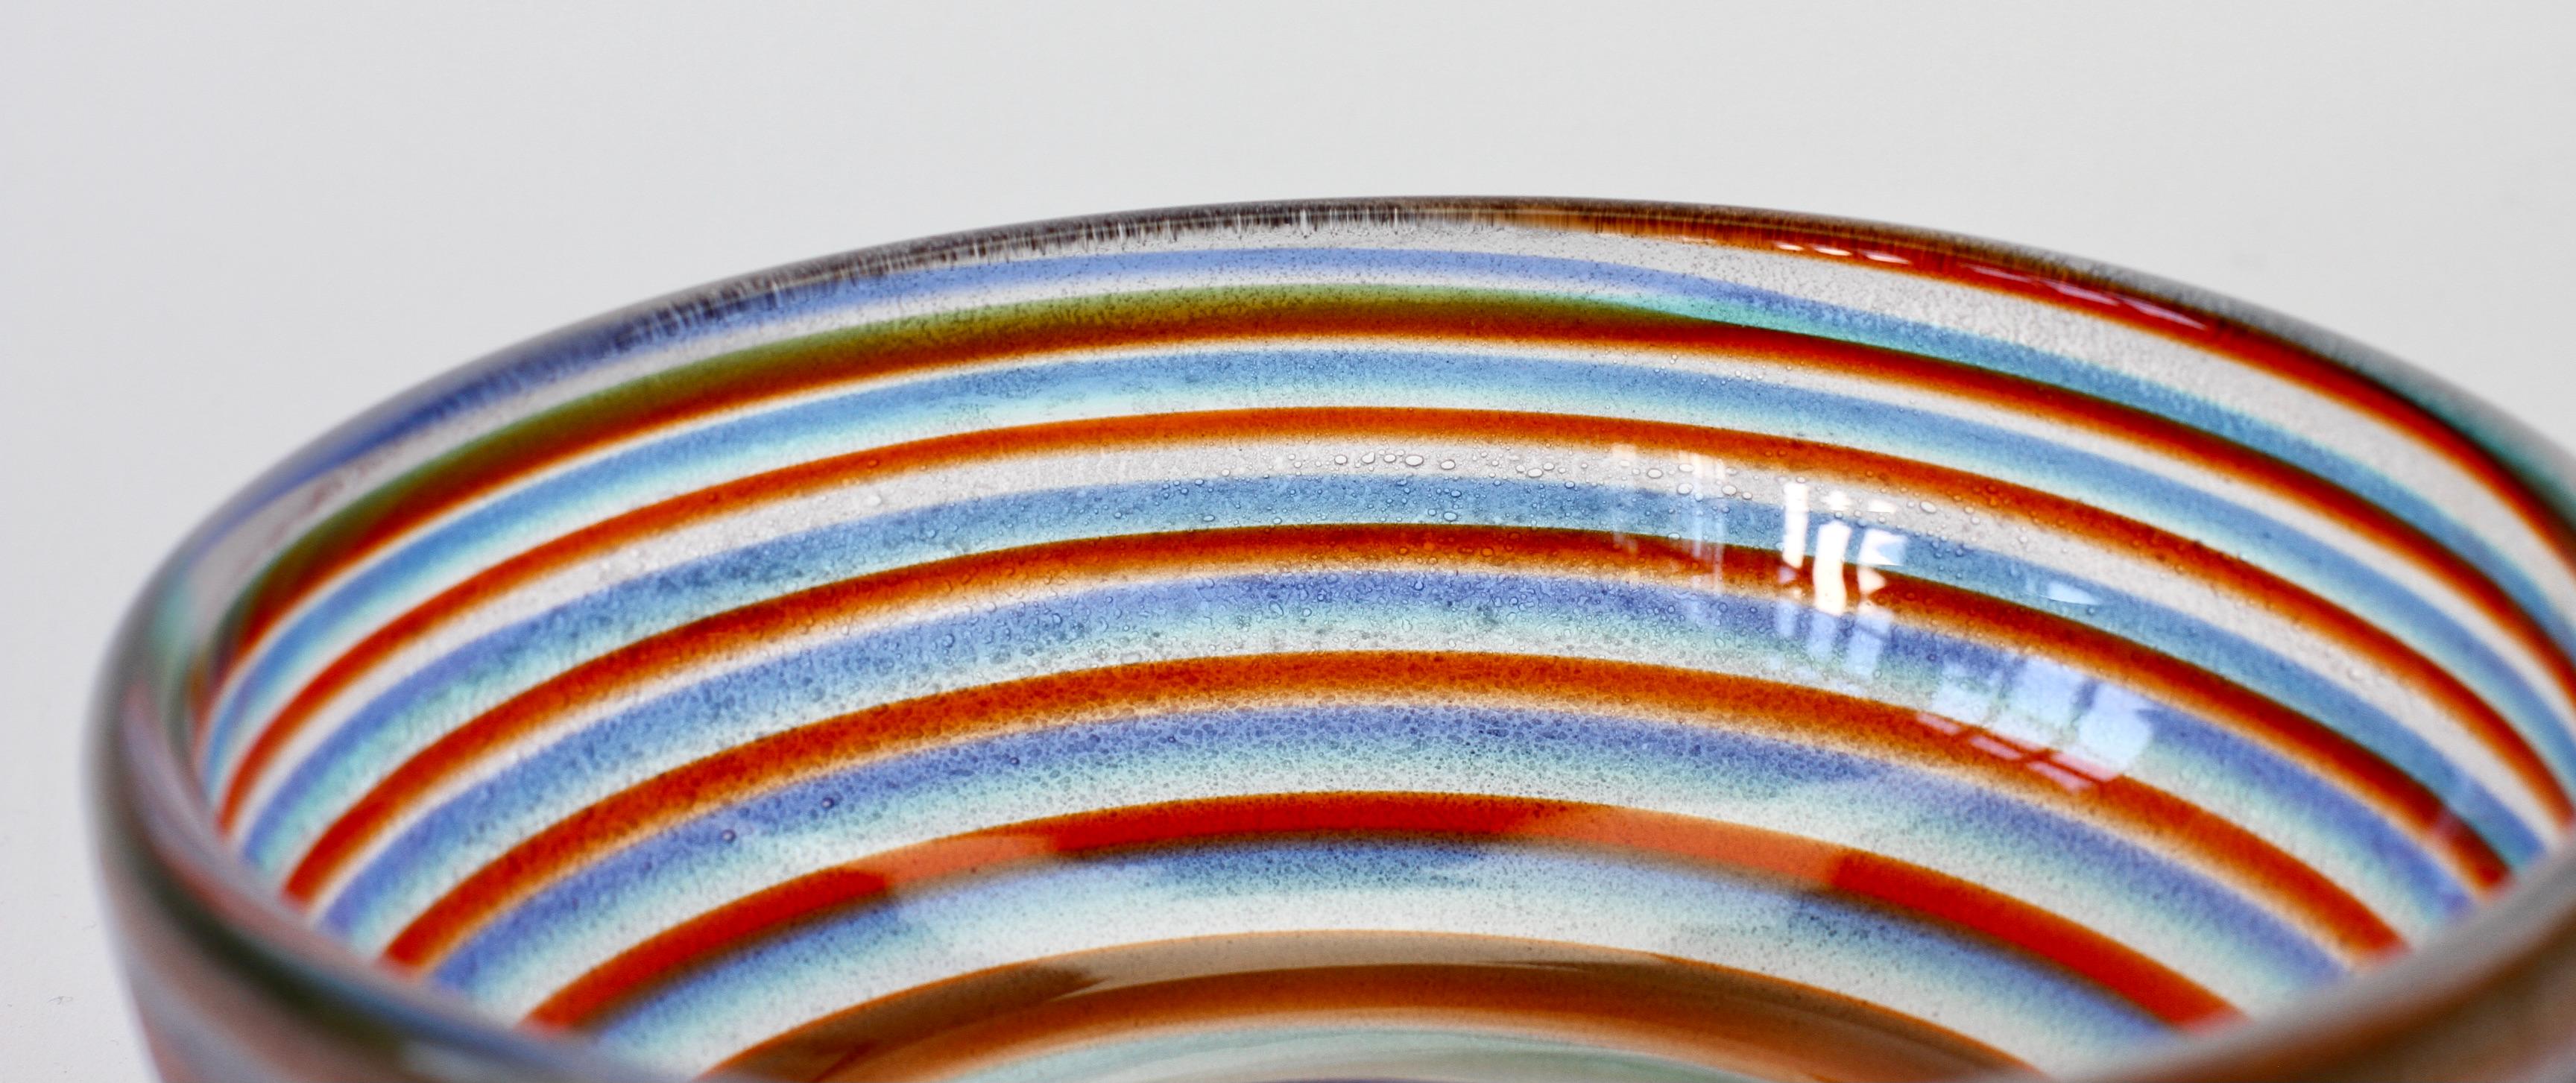 Cenedese Vintage Mid-Century 'Corroso' Murano Glass Bowl with Colorful Spiral 8